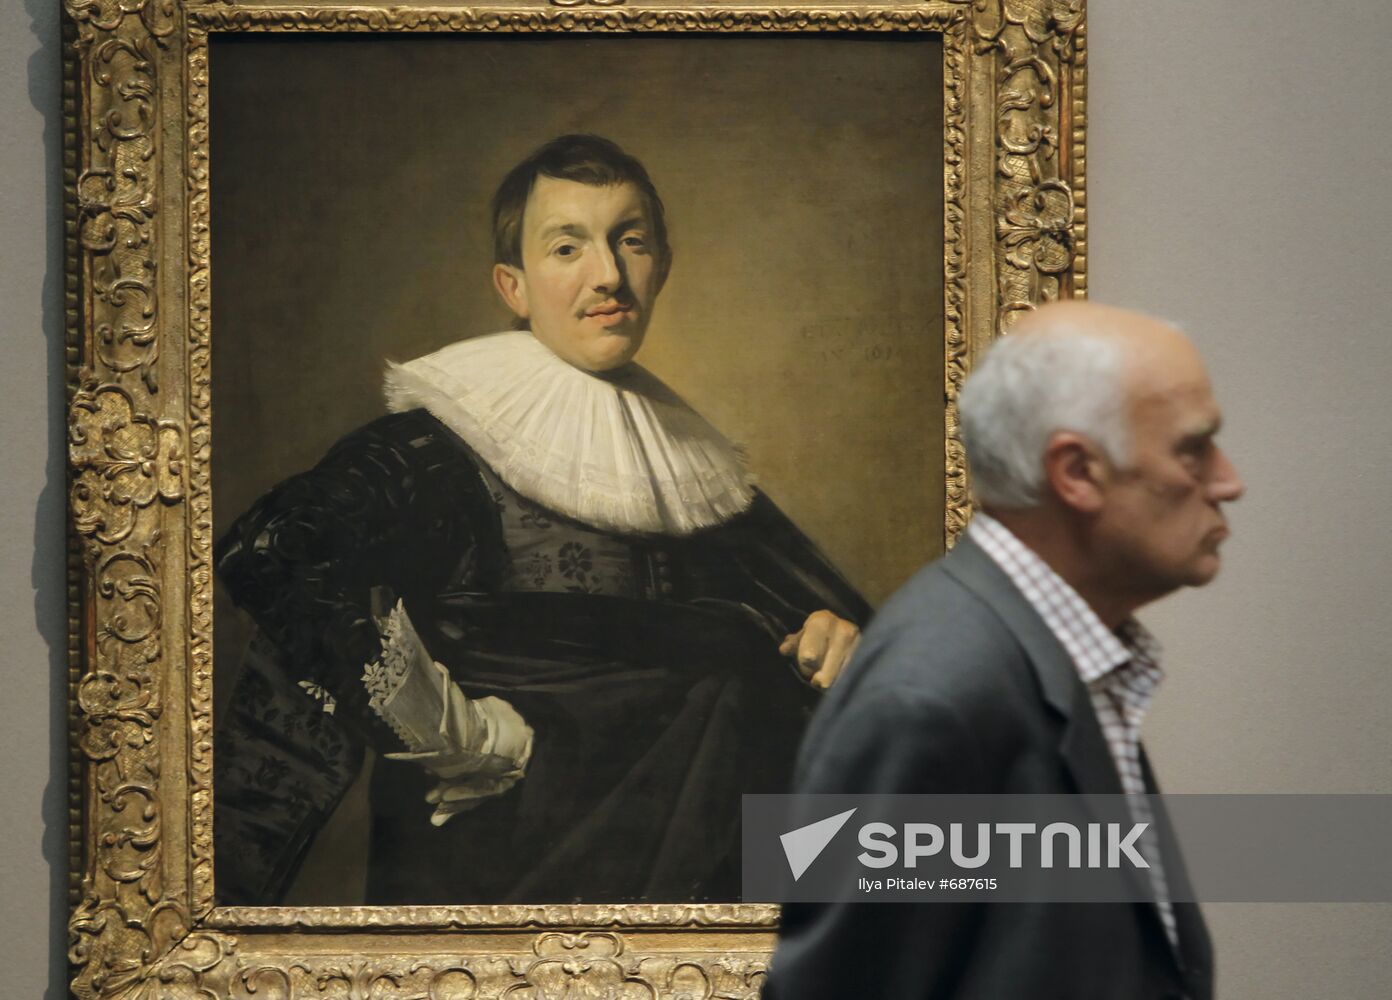 Exhibition "From Raphael to Goya", Pushkin Museum of Fine Arts